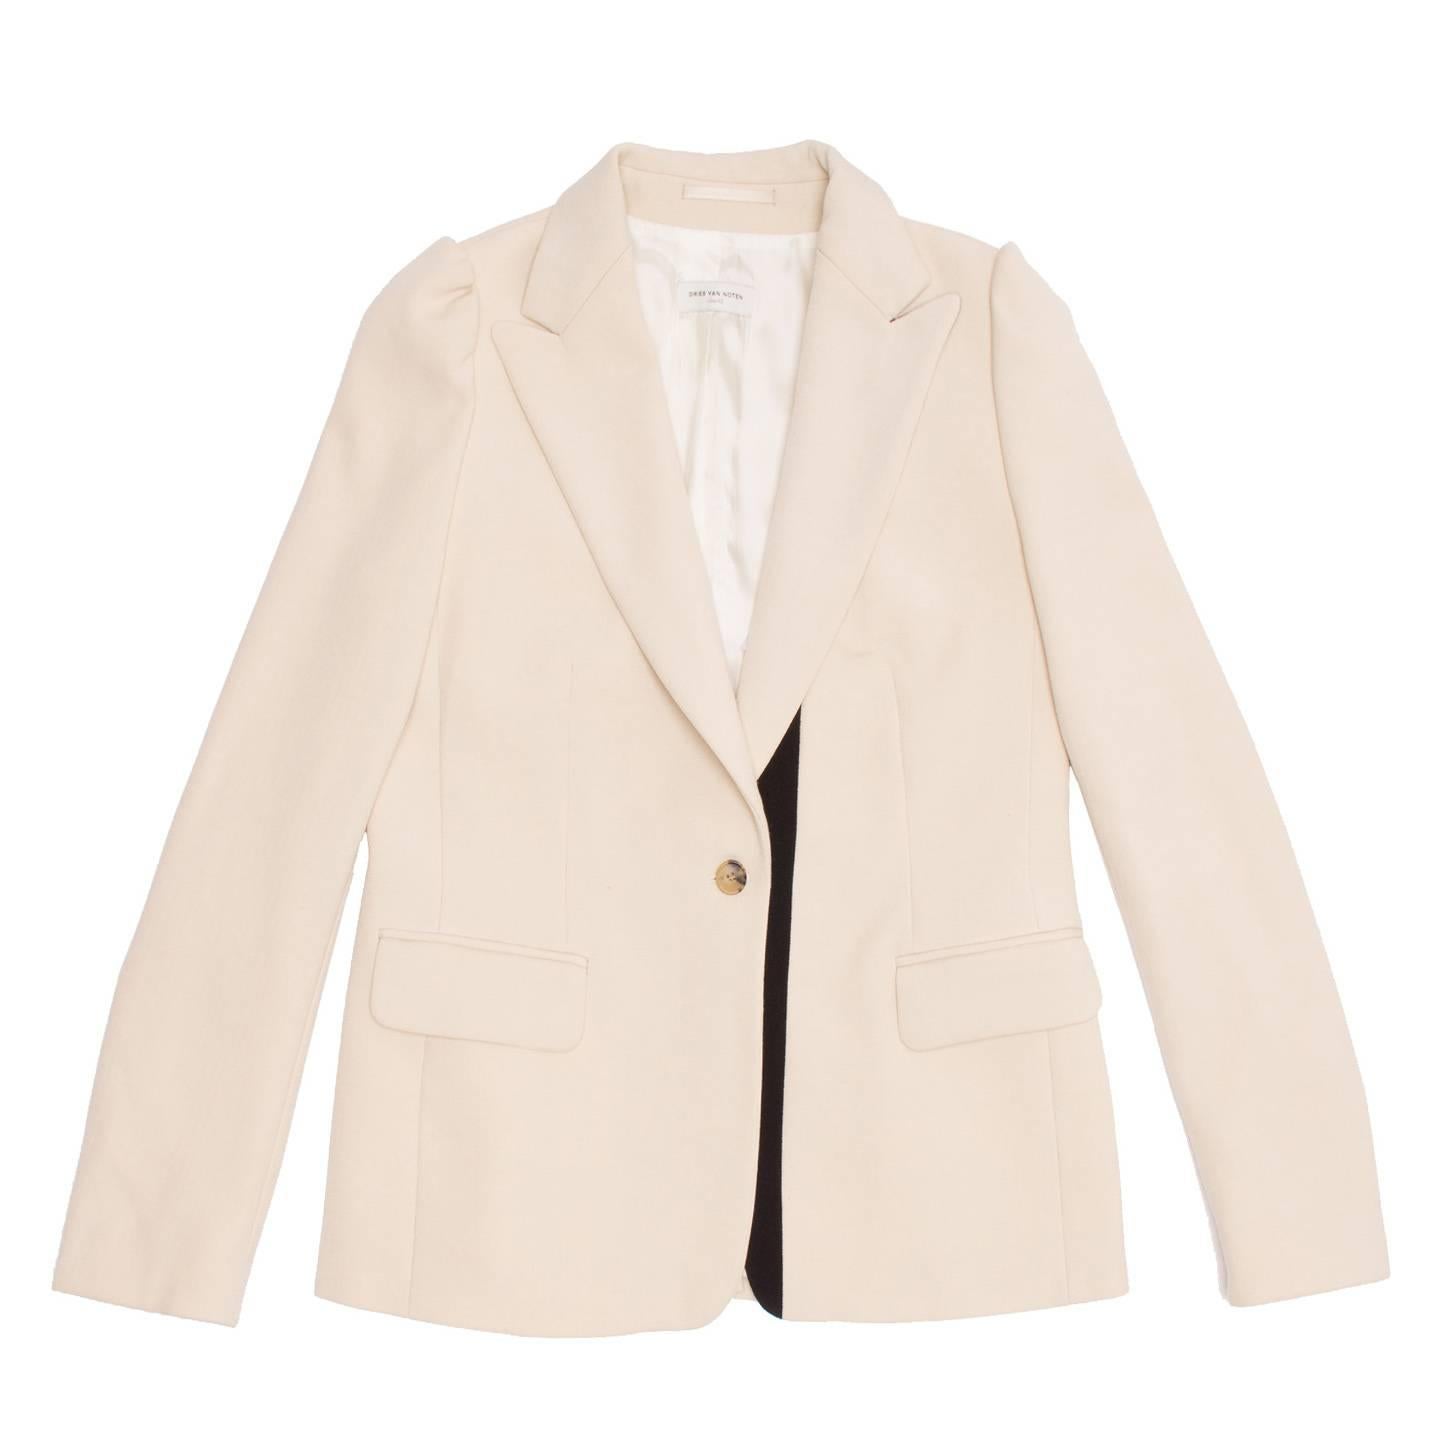 Wool cream colored single button blazer with black trim detailing underneath collar and along front opening and raised shoulder detailing.

Size  42 French sizing

Condition  Excellent: never worn